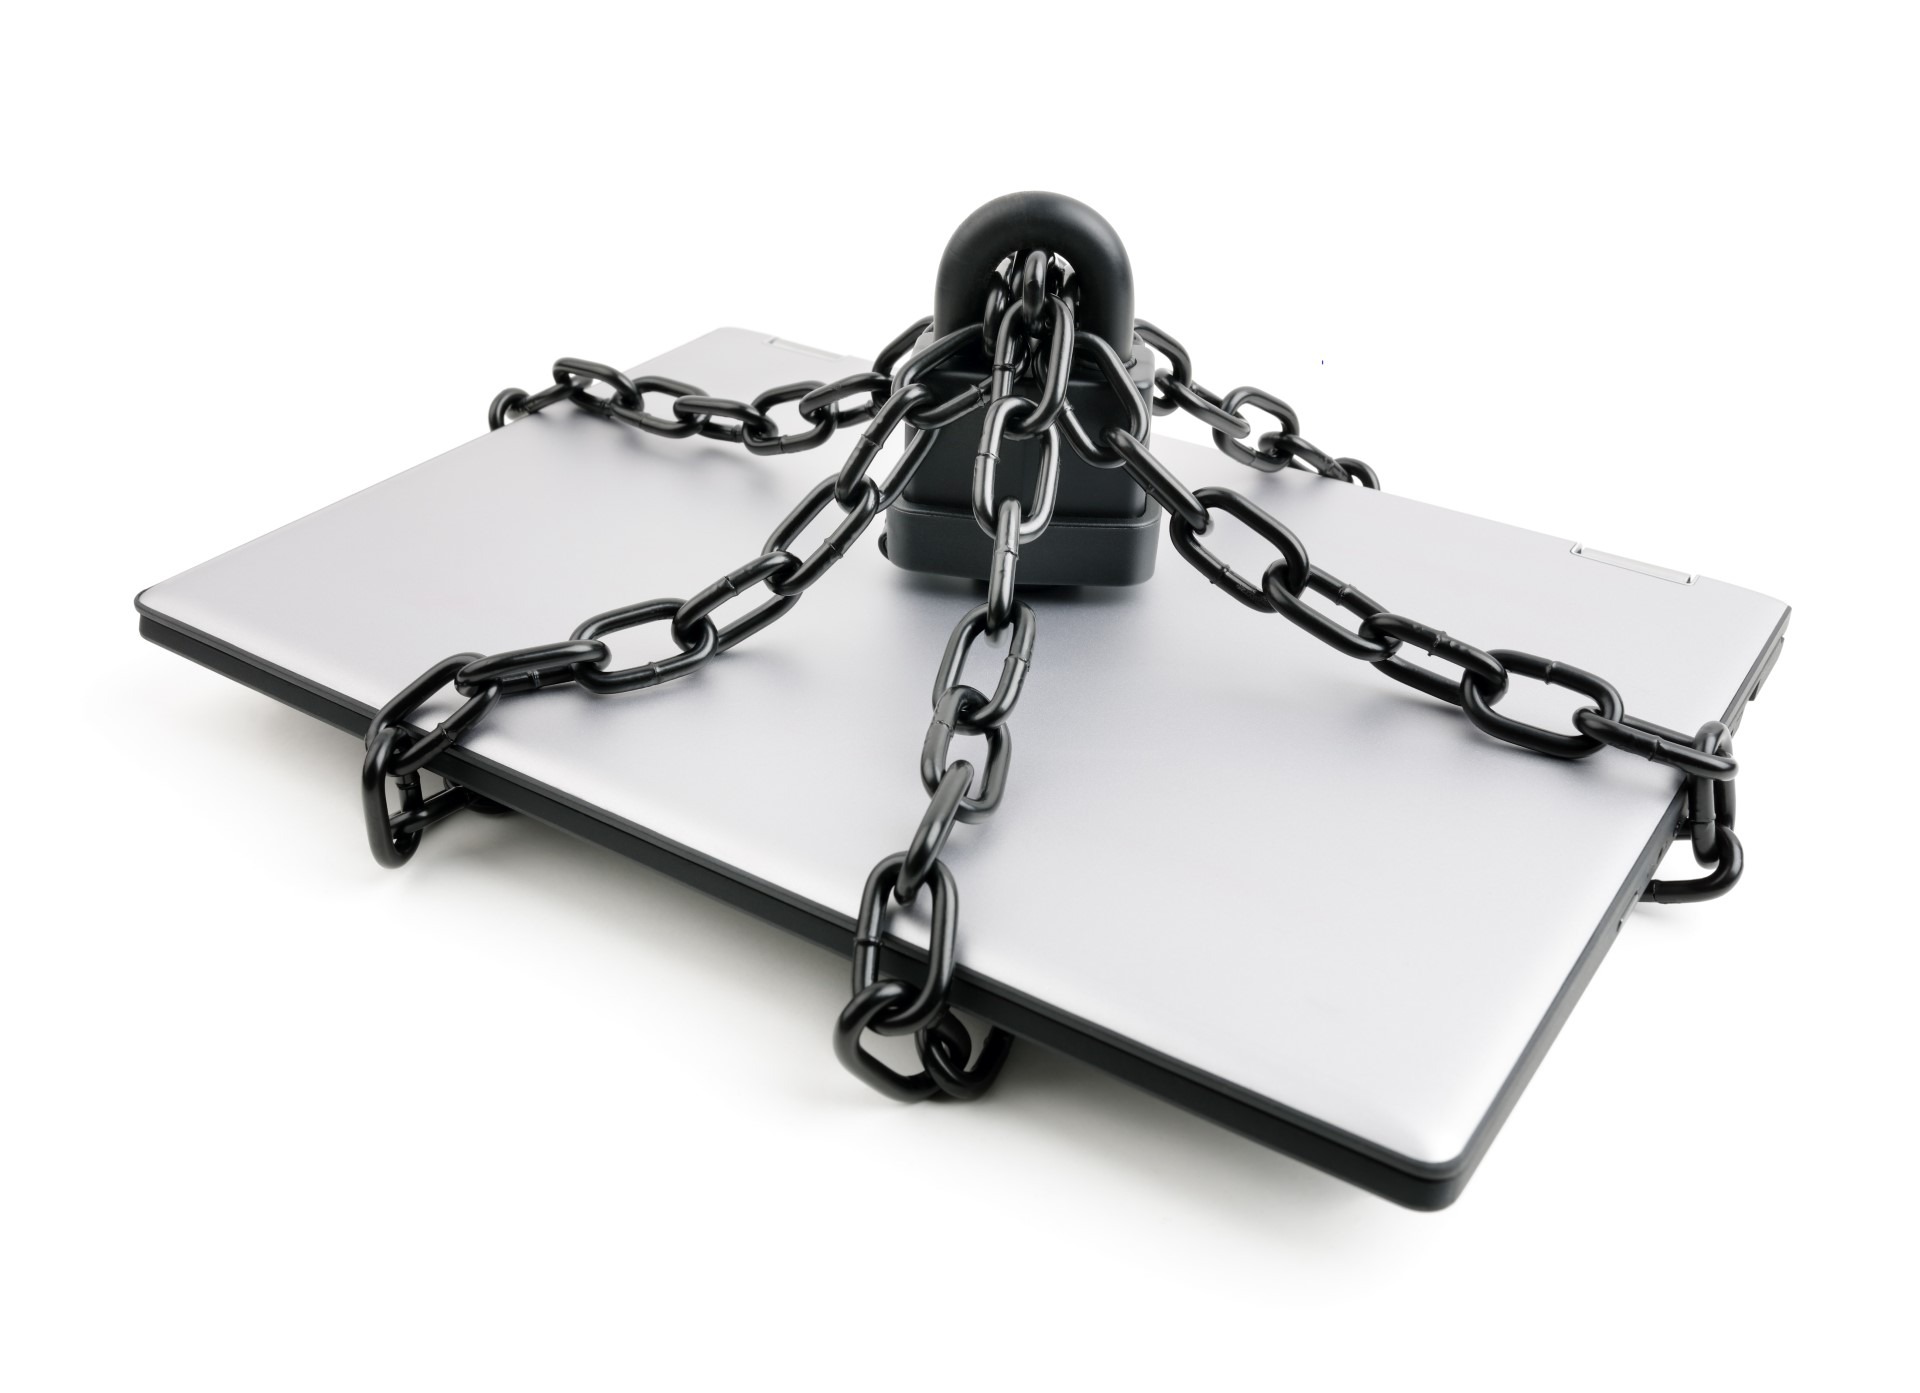 Office 365 Advanced Threat Protection Blog Featured Image - Computer Laptop Locked with a Padlock and Chains